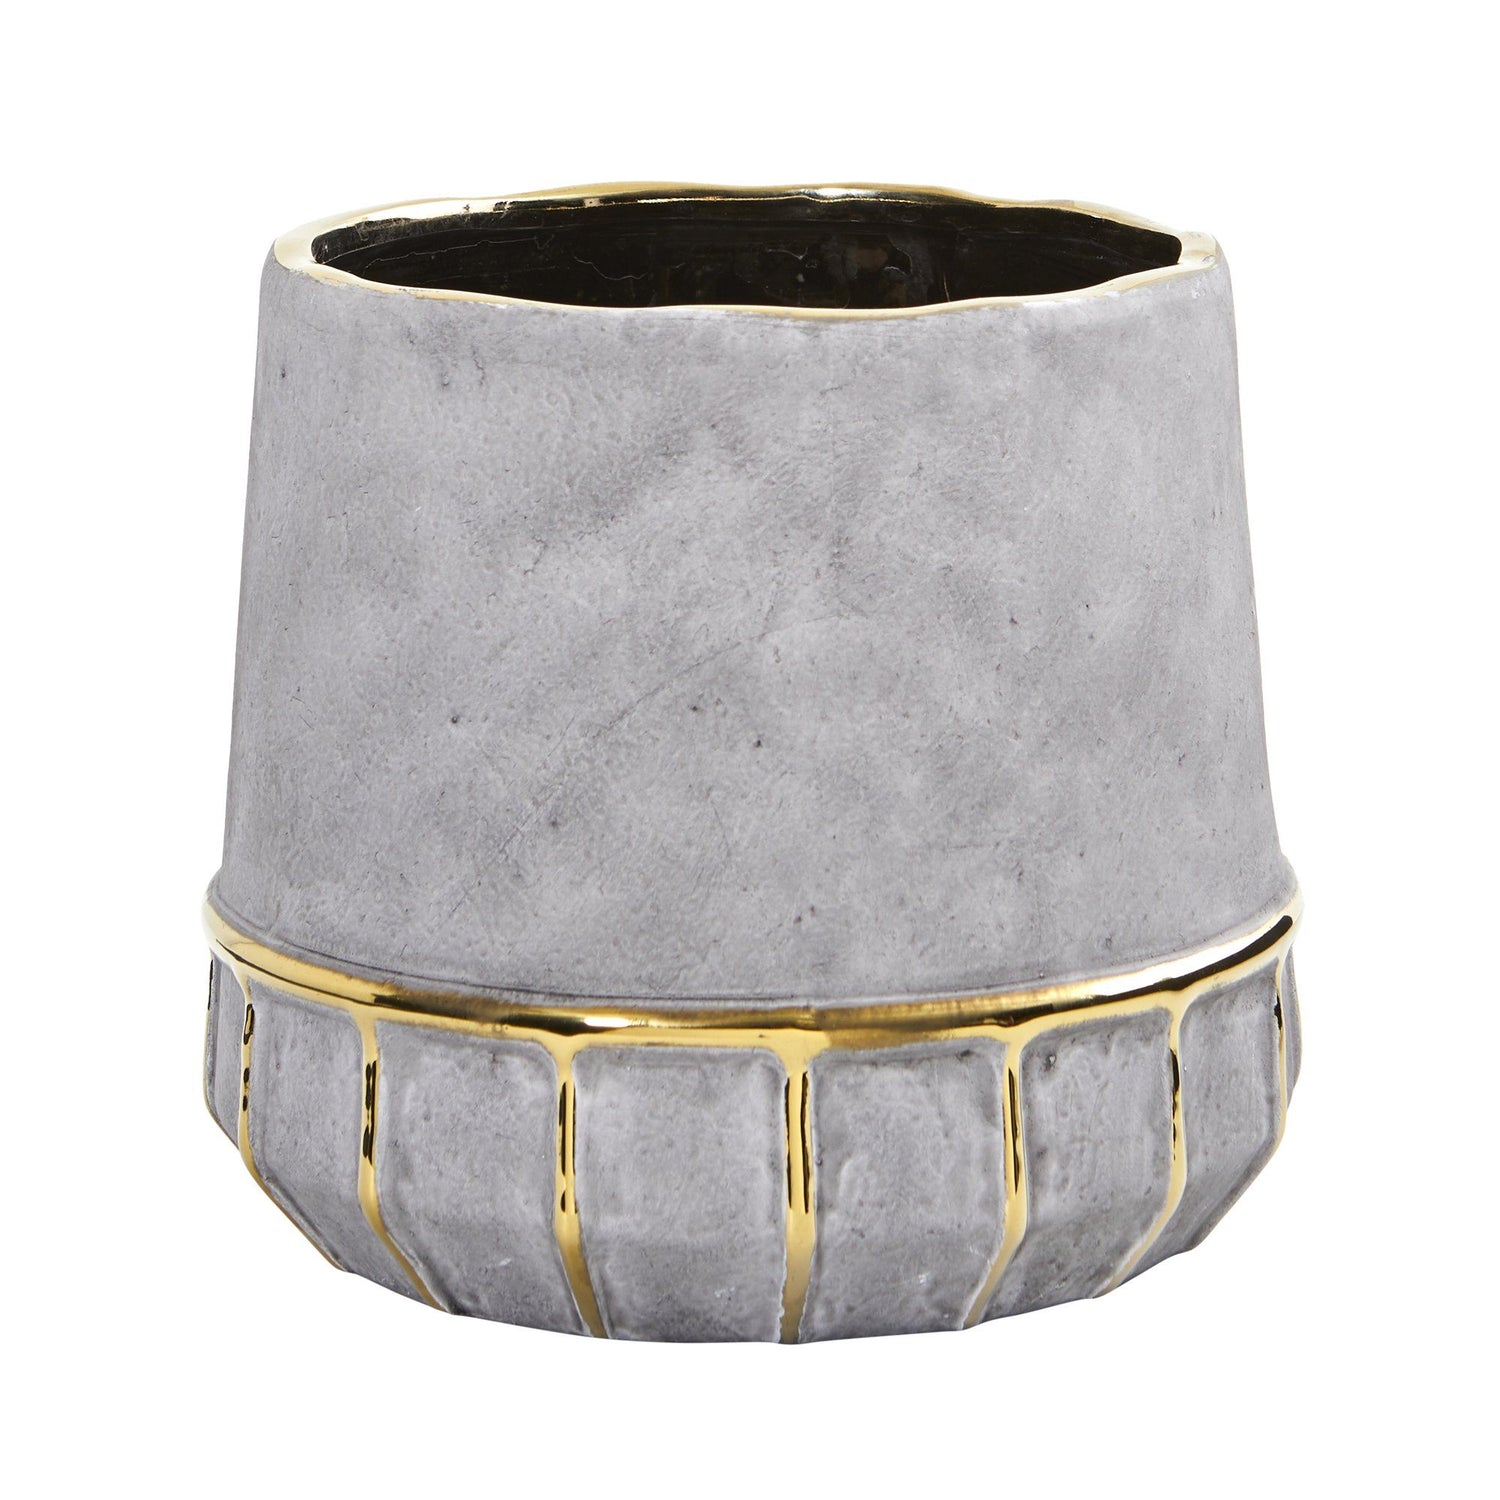 8.5” Regal Stone Decorative Planter with Gold Accents